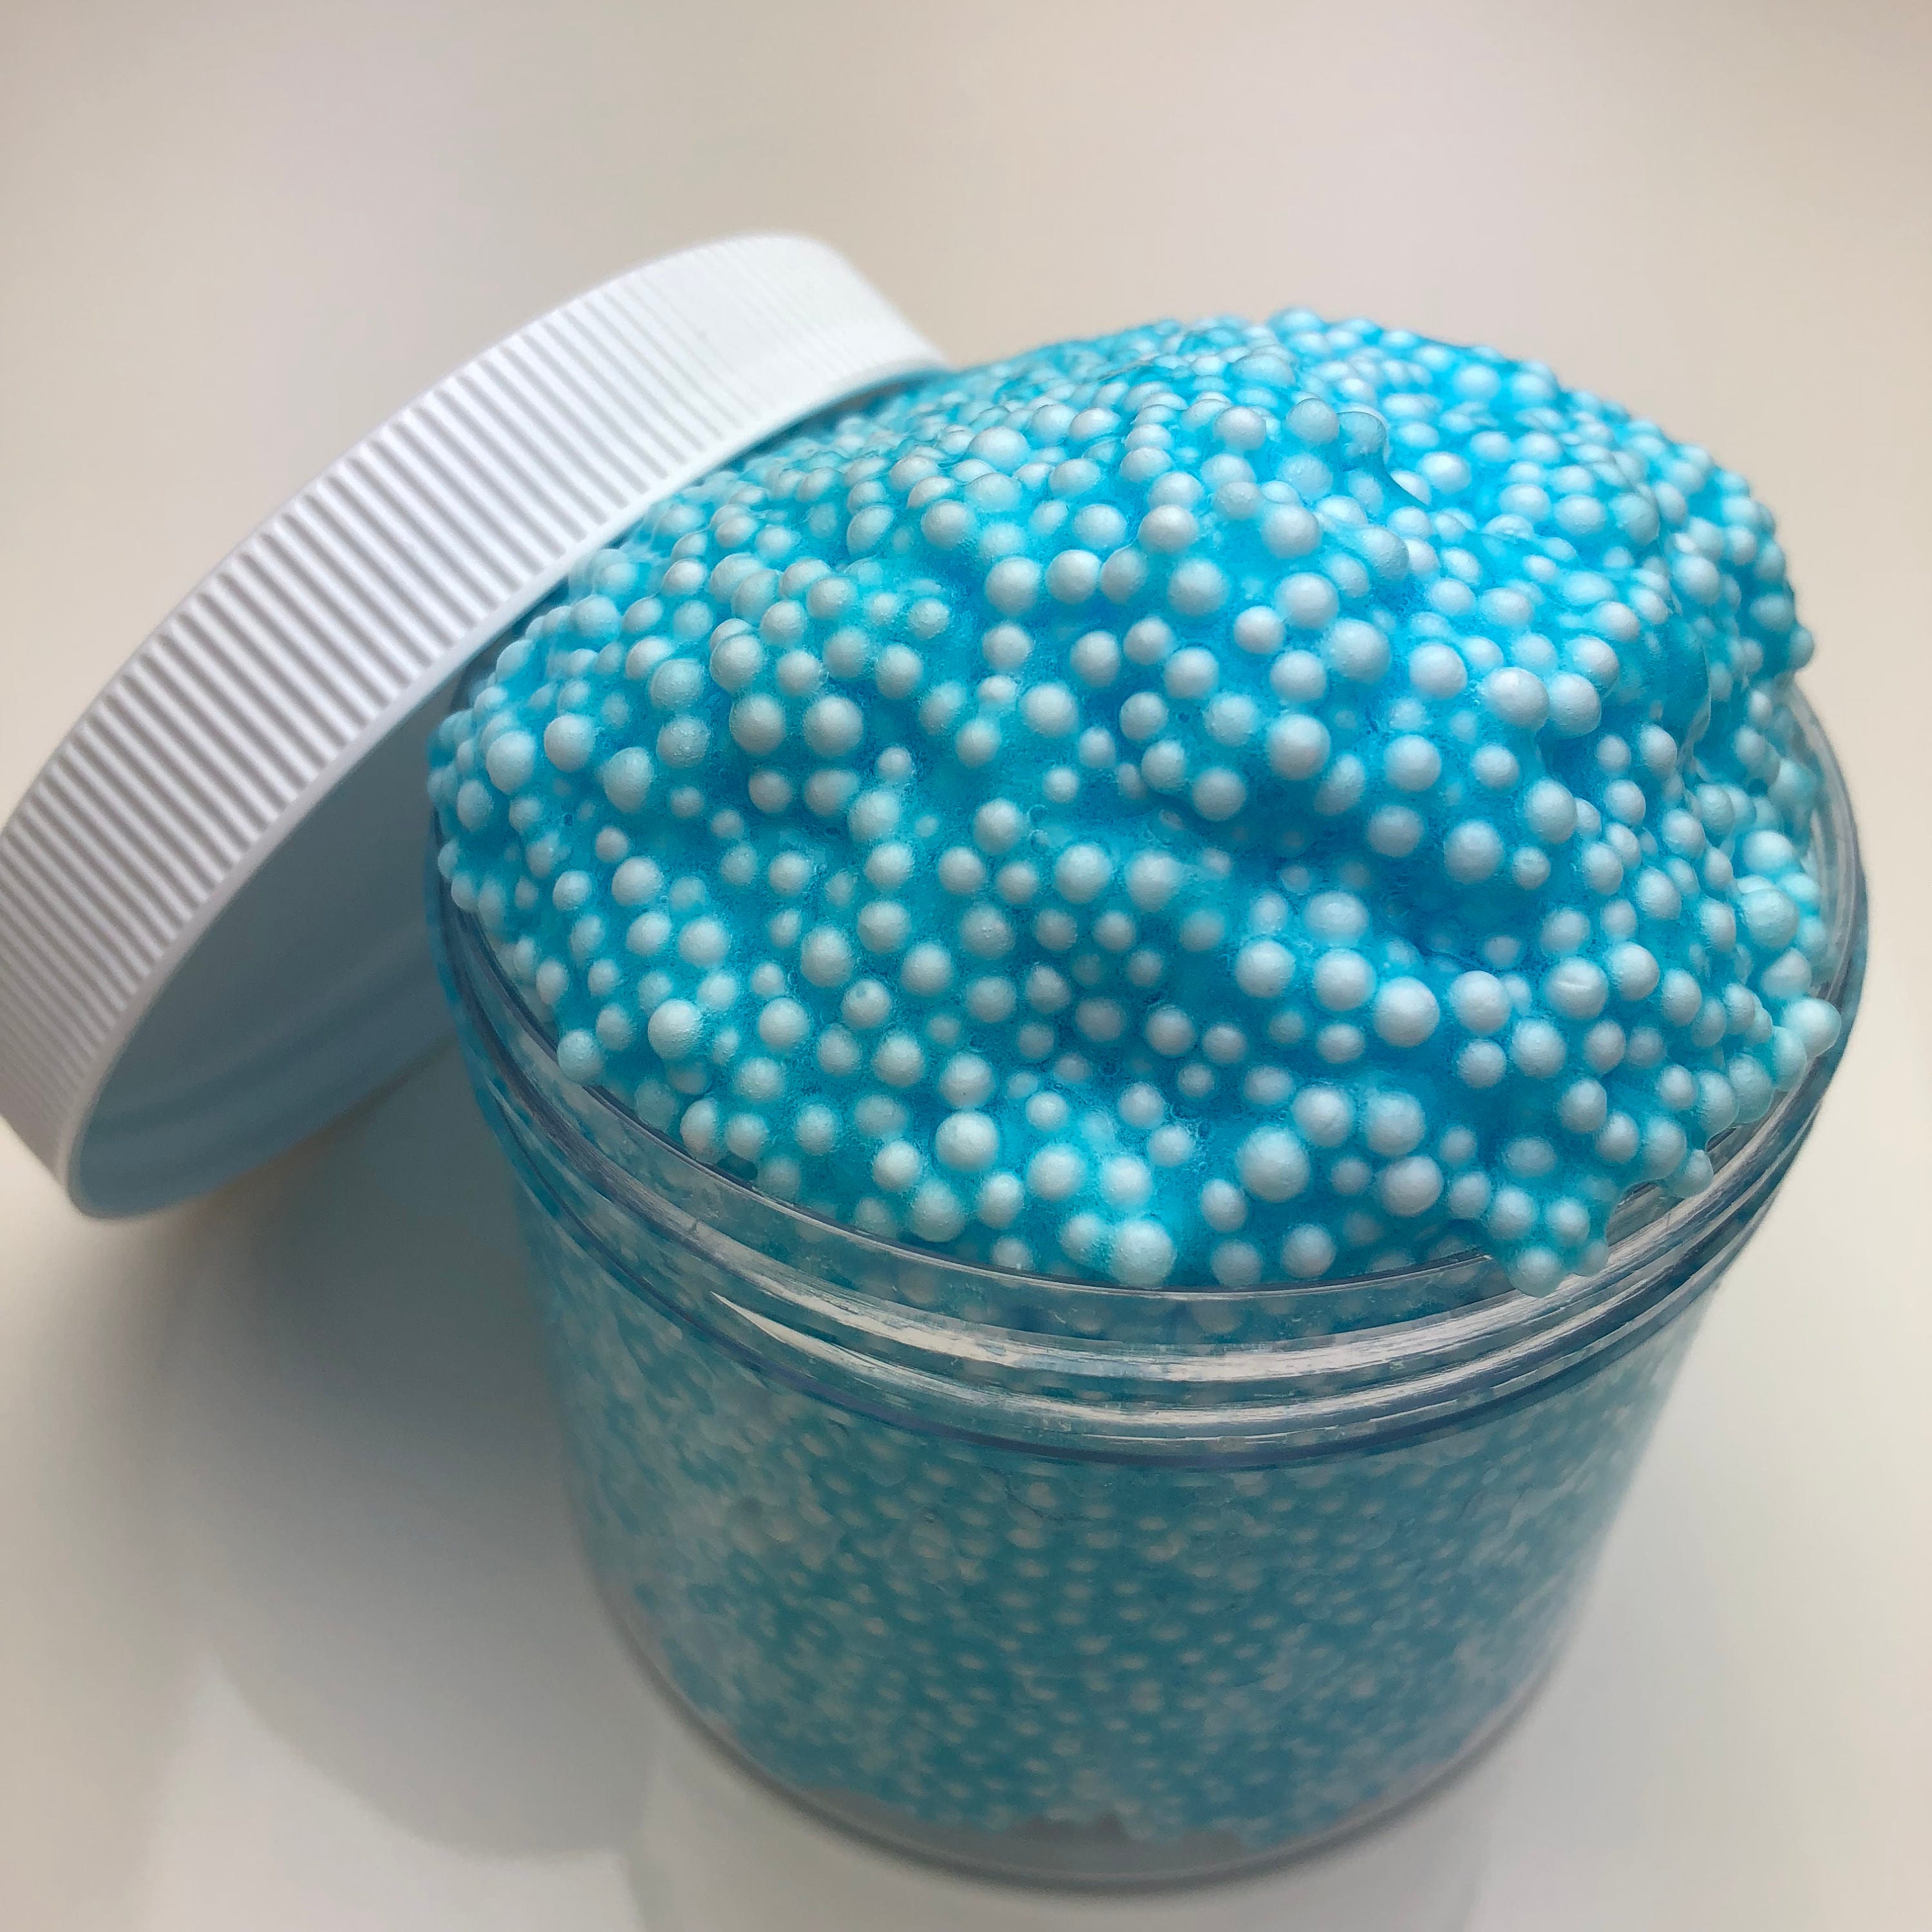 Blue Cotton Candy Floam Slime Clear Based Slime W/ Foam Beads